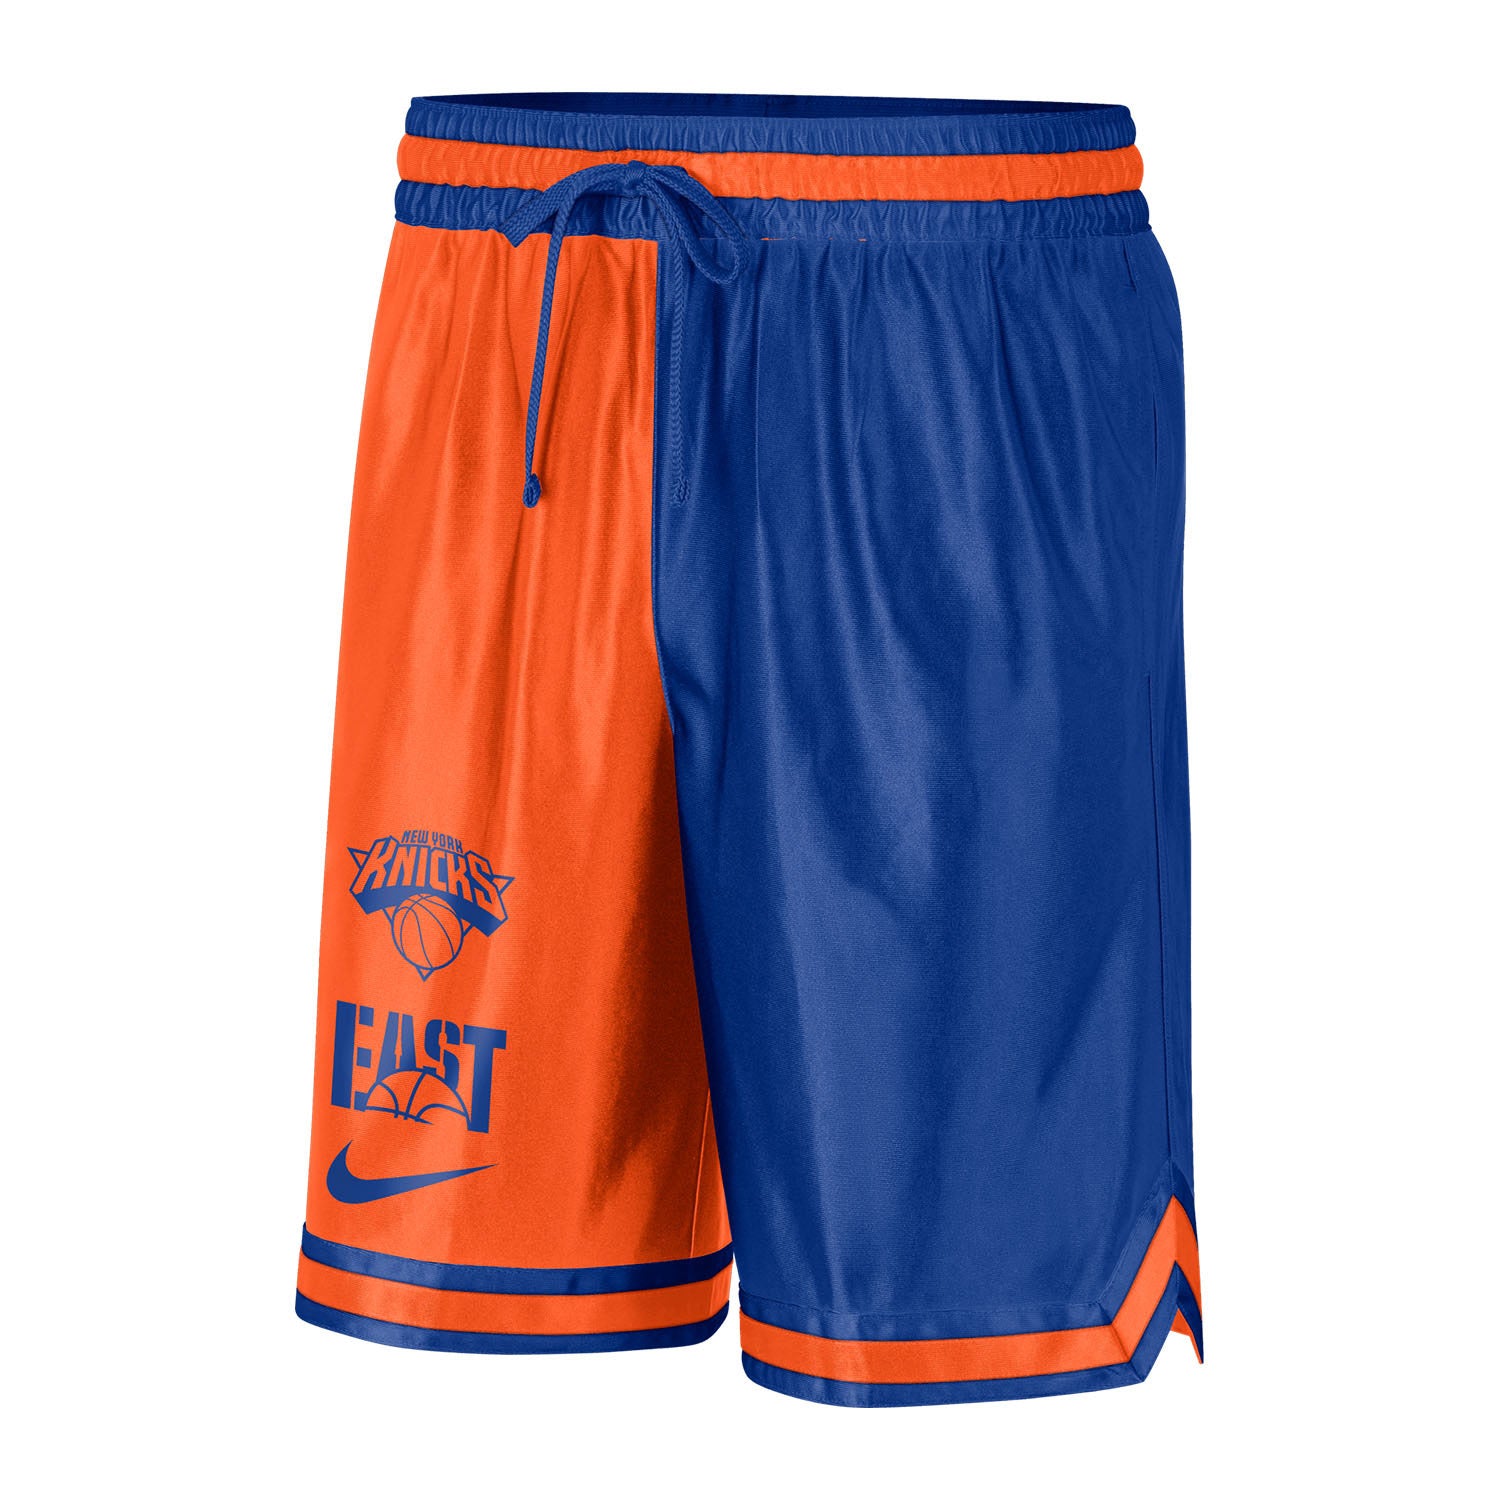 Nike Knicks Dri-fit Courtside DNA Shorts in Orange and Blue - Front View